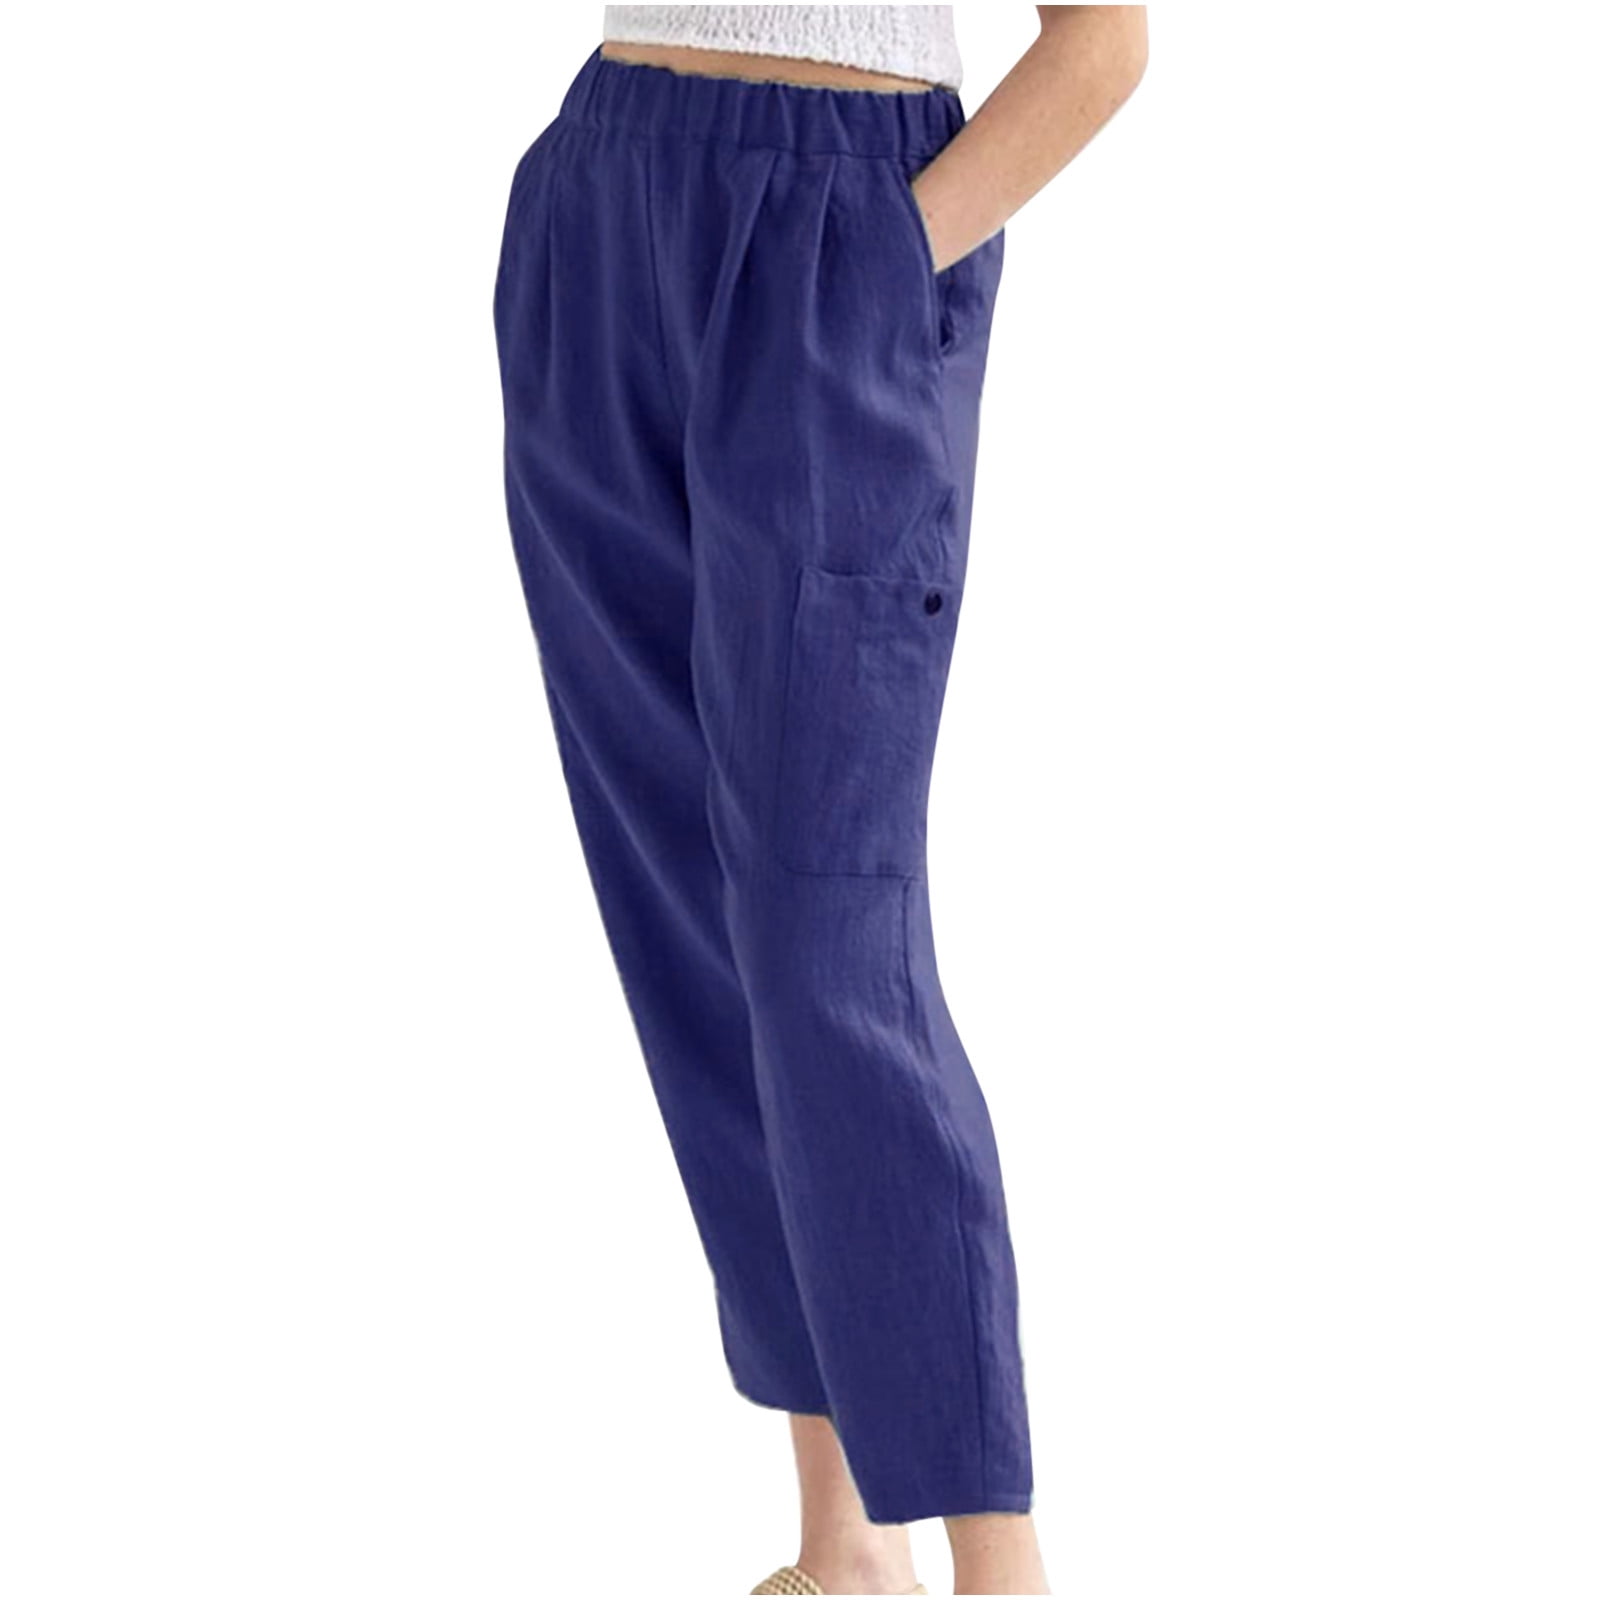 HTNBO Women's Casual Cropped Pants Elastic Waist with Pockets Linen ...